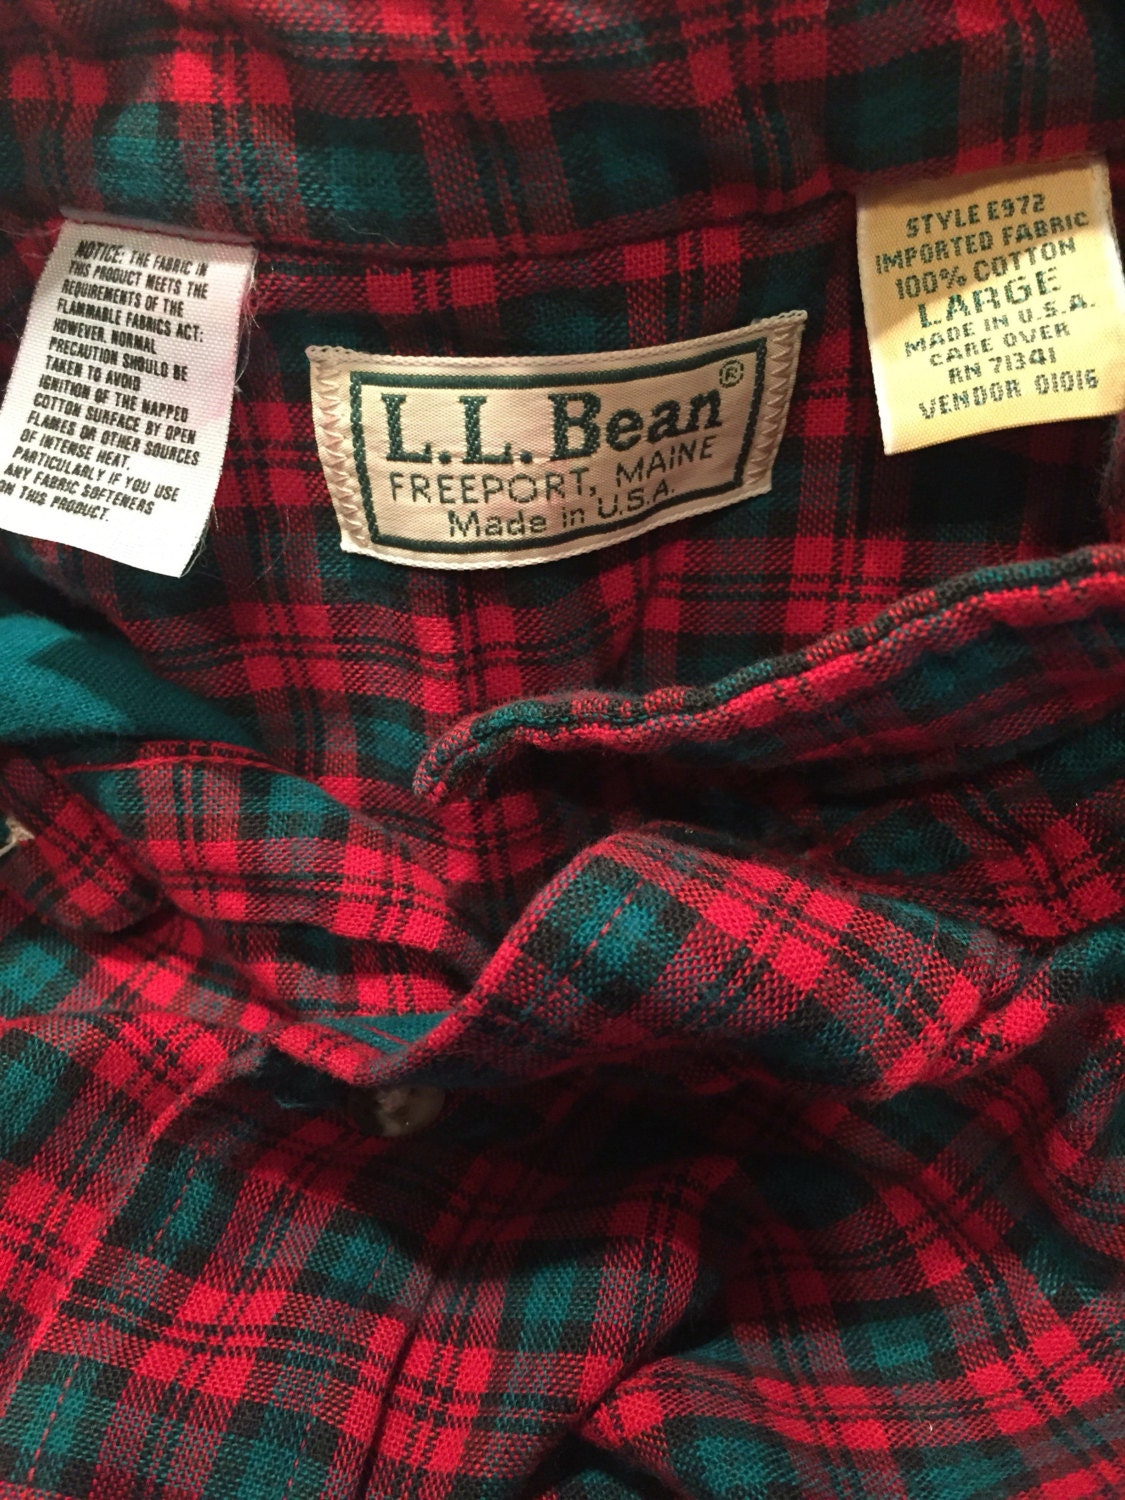 L. L. Bean Red Green Plaid Flannel Lined Shirt Large L Made in